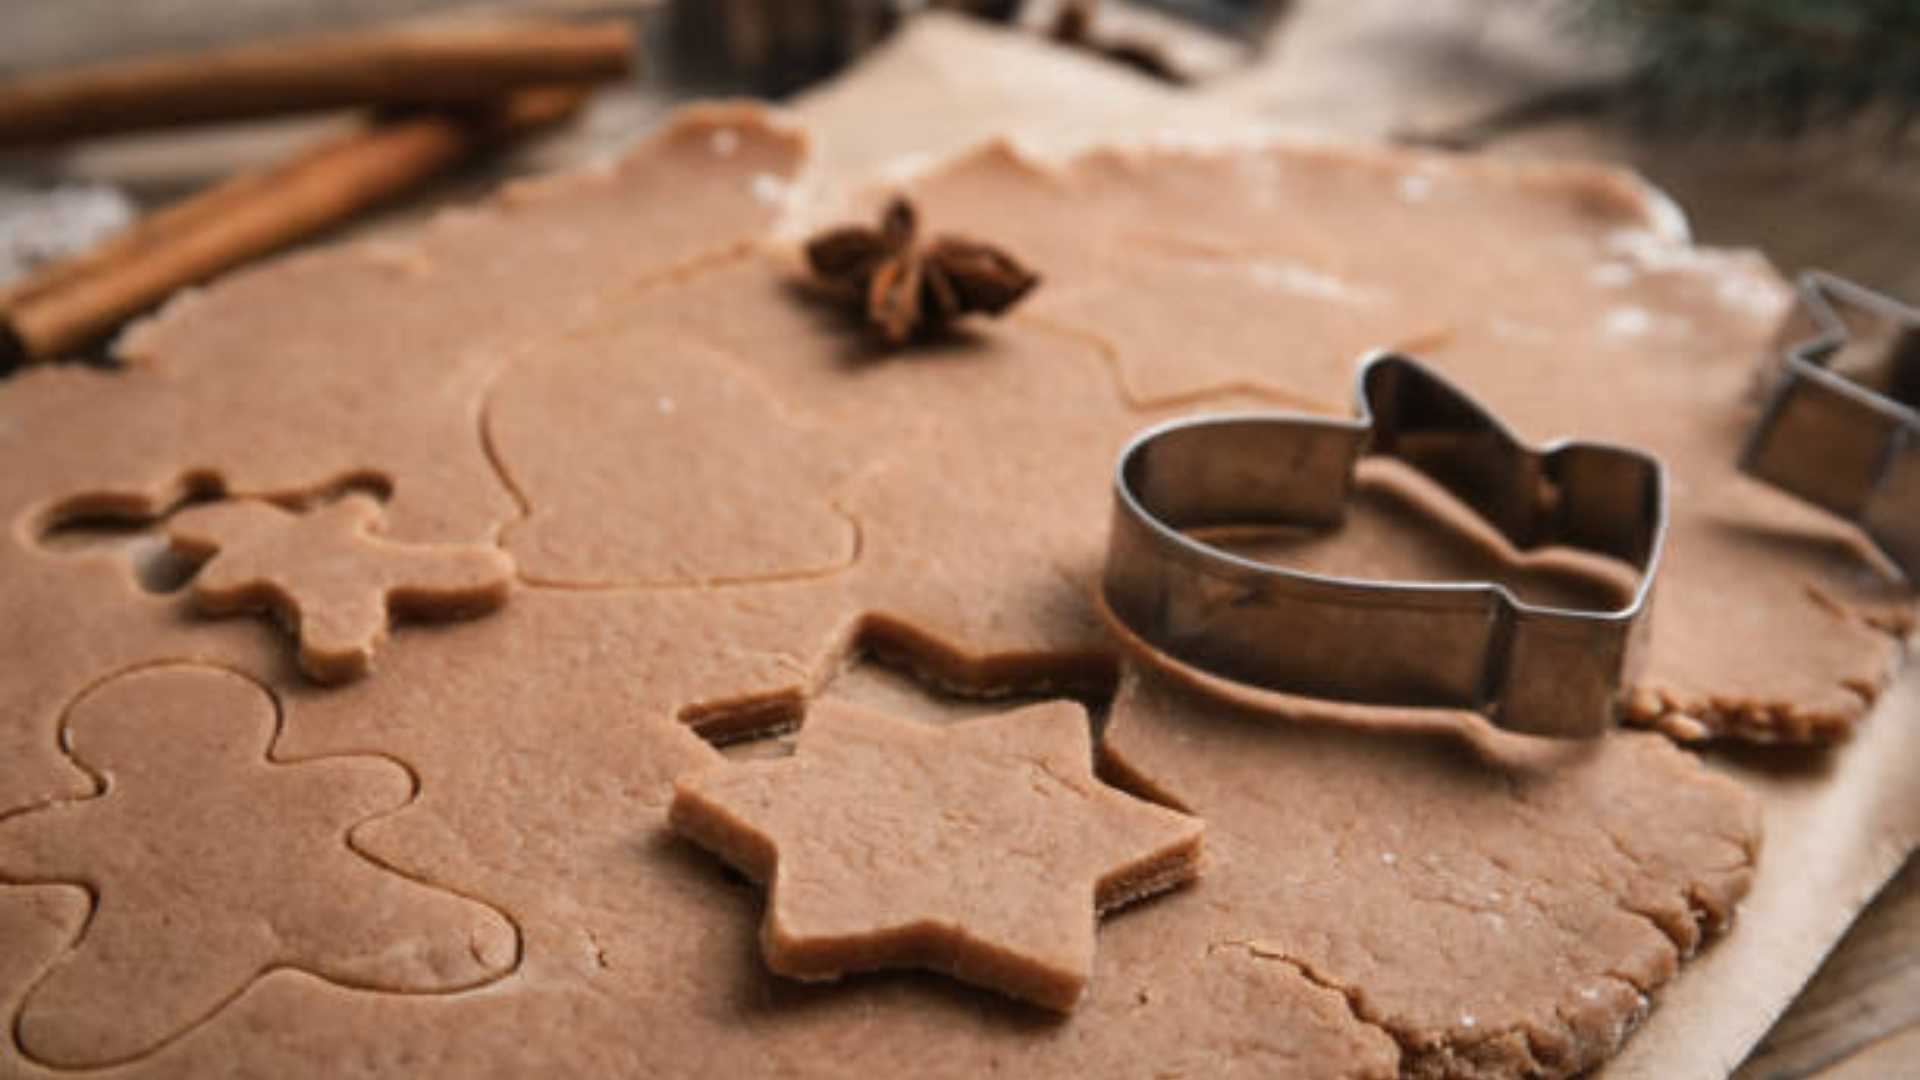 gluten-fre gingerbread cookie recipe featured image